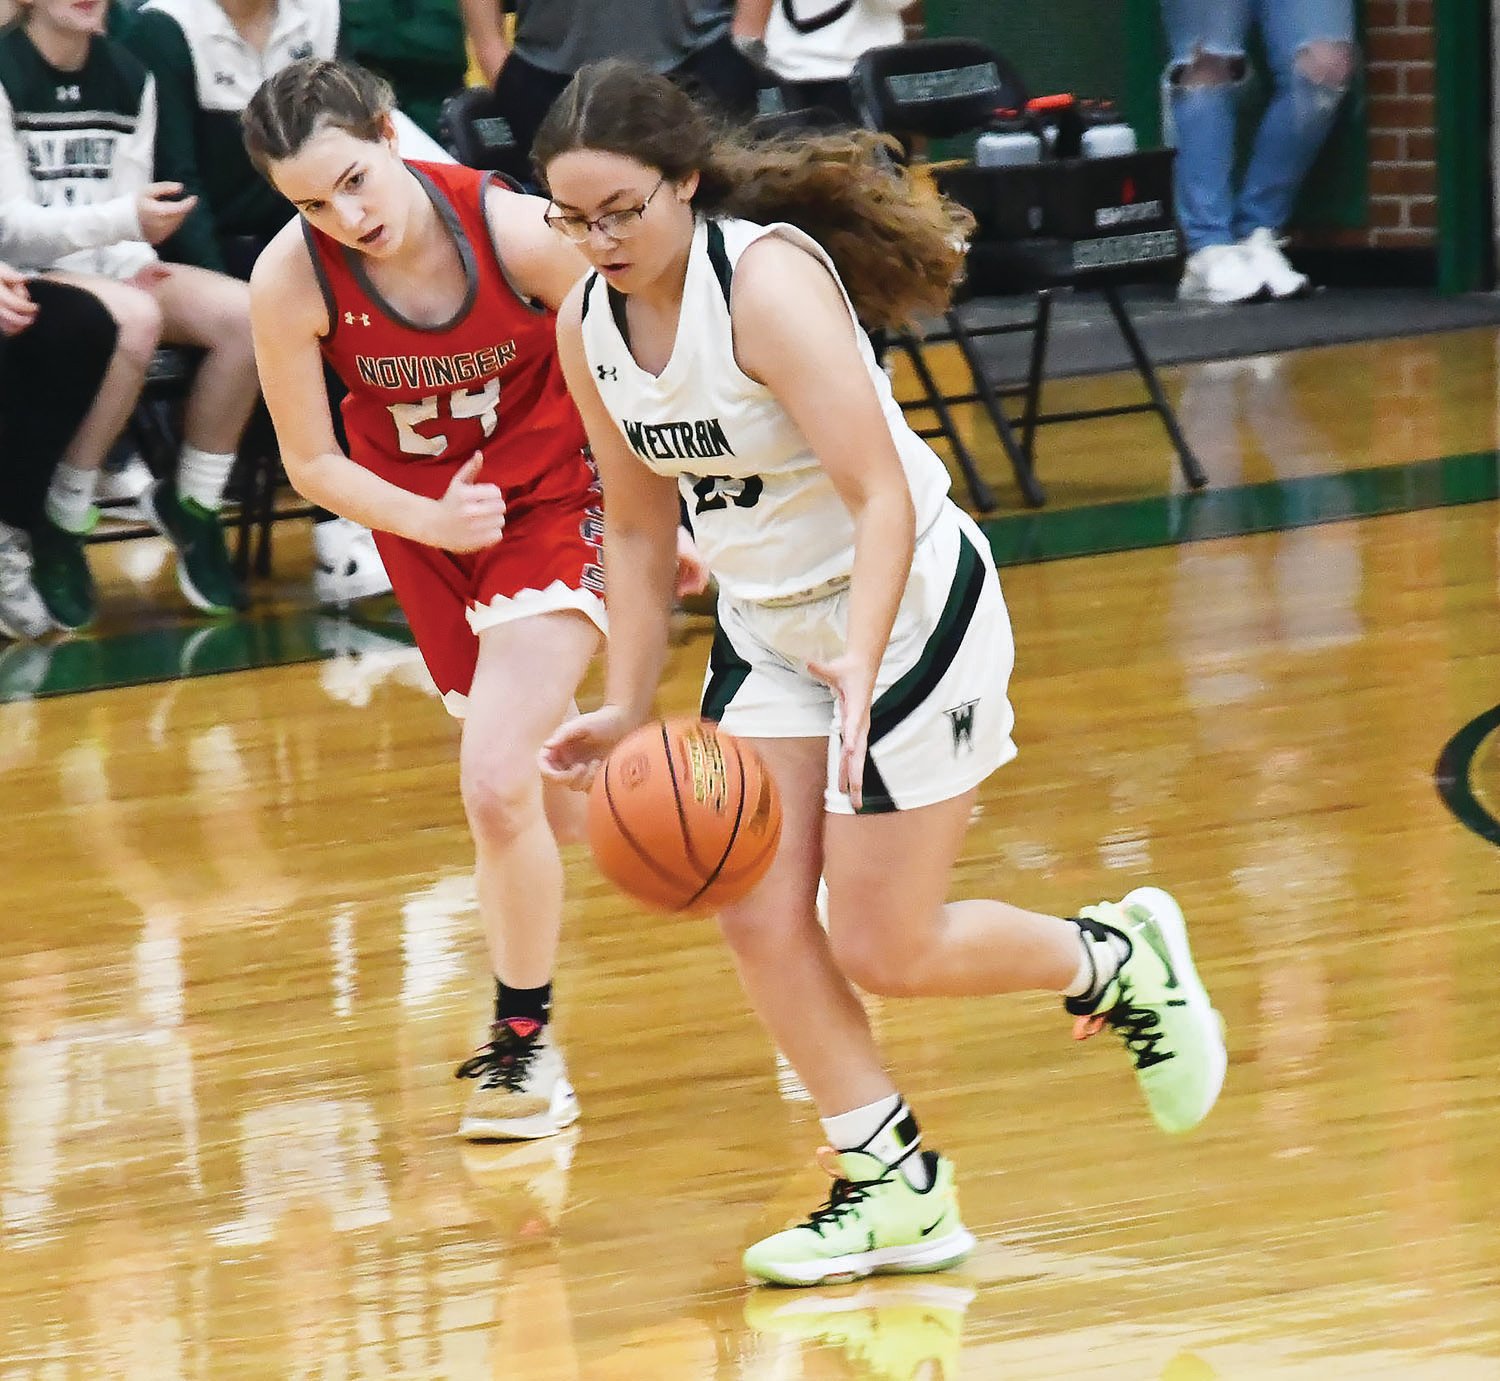 Westran's Jaycie Colley steals the ball and heads up court during last Friday's game.